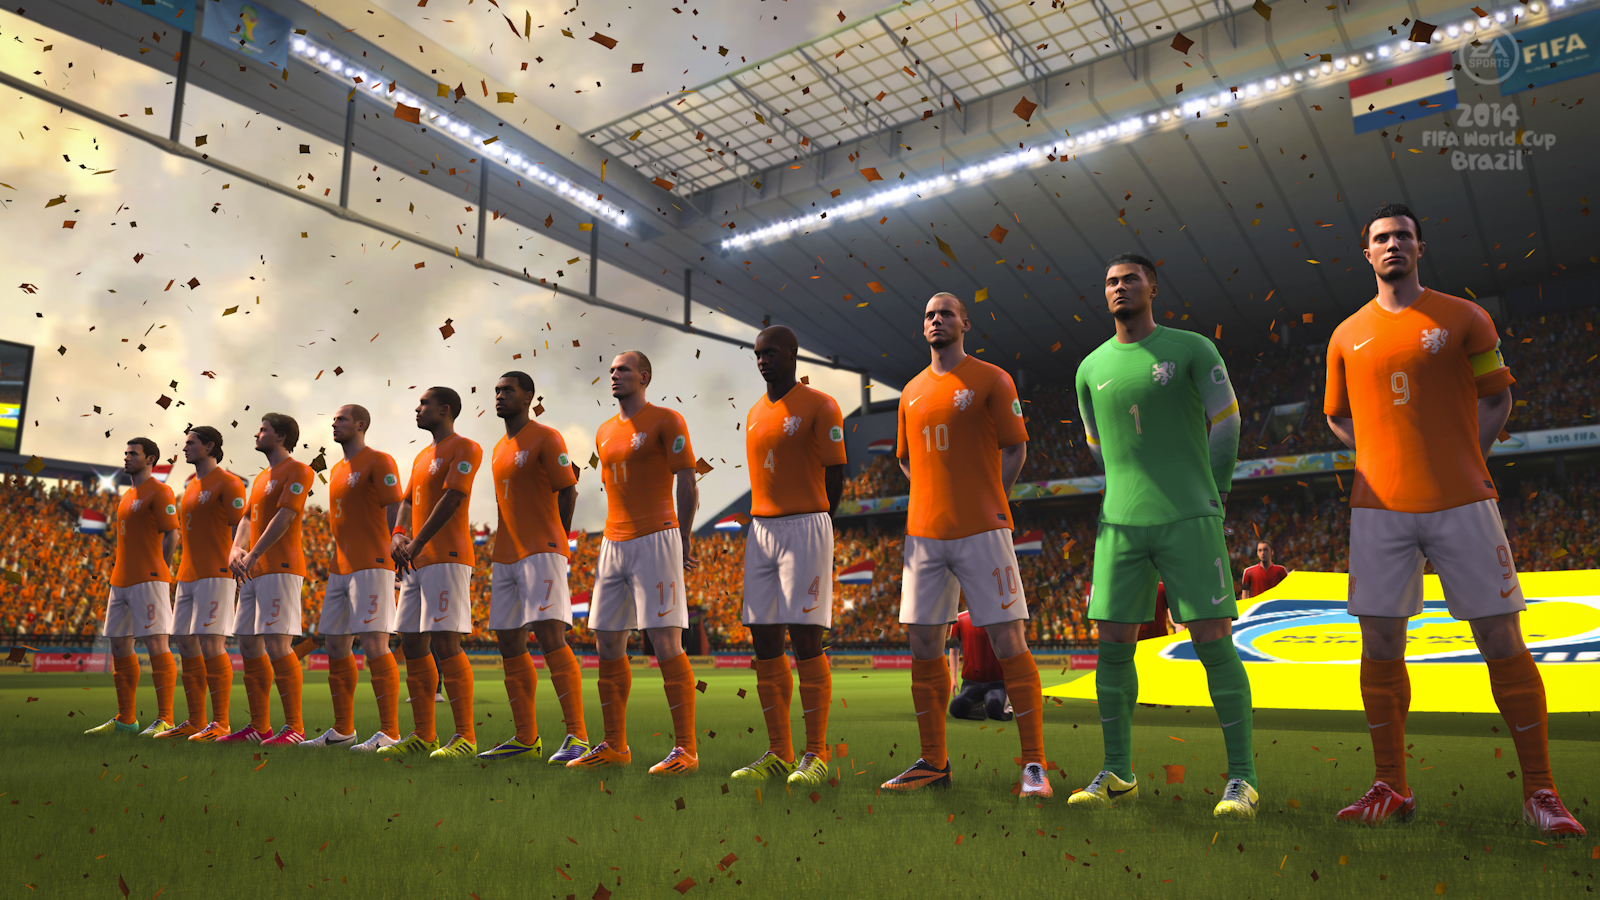 2014 FIFA World Cup Brazil demo is out now, event still not taking place until June